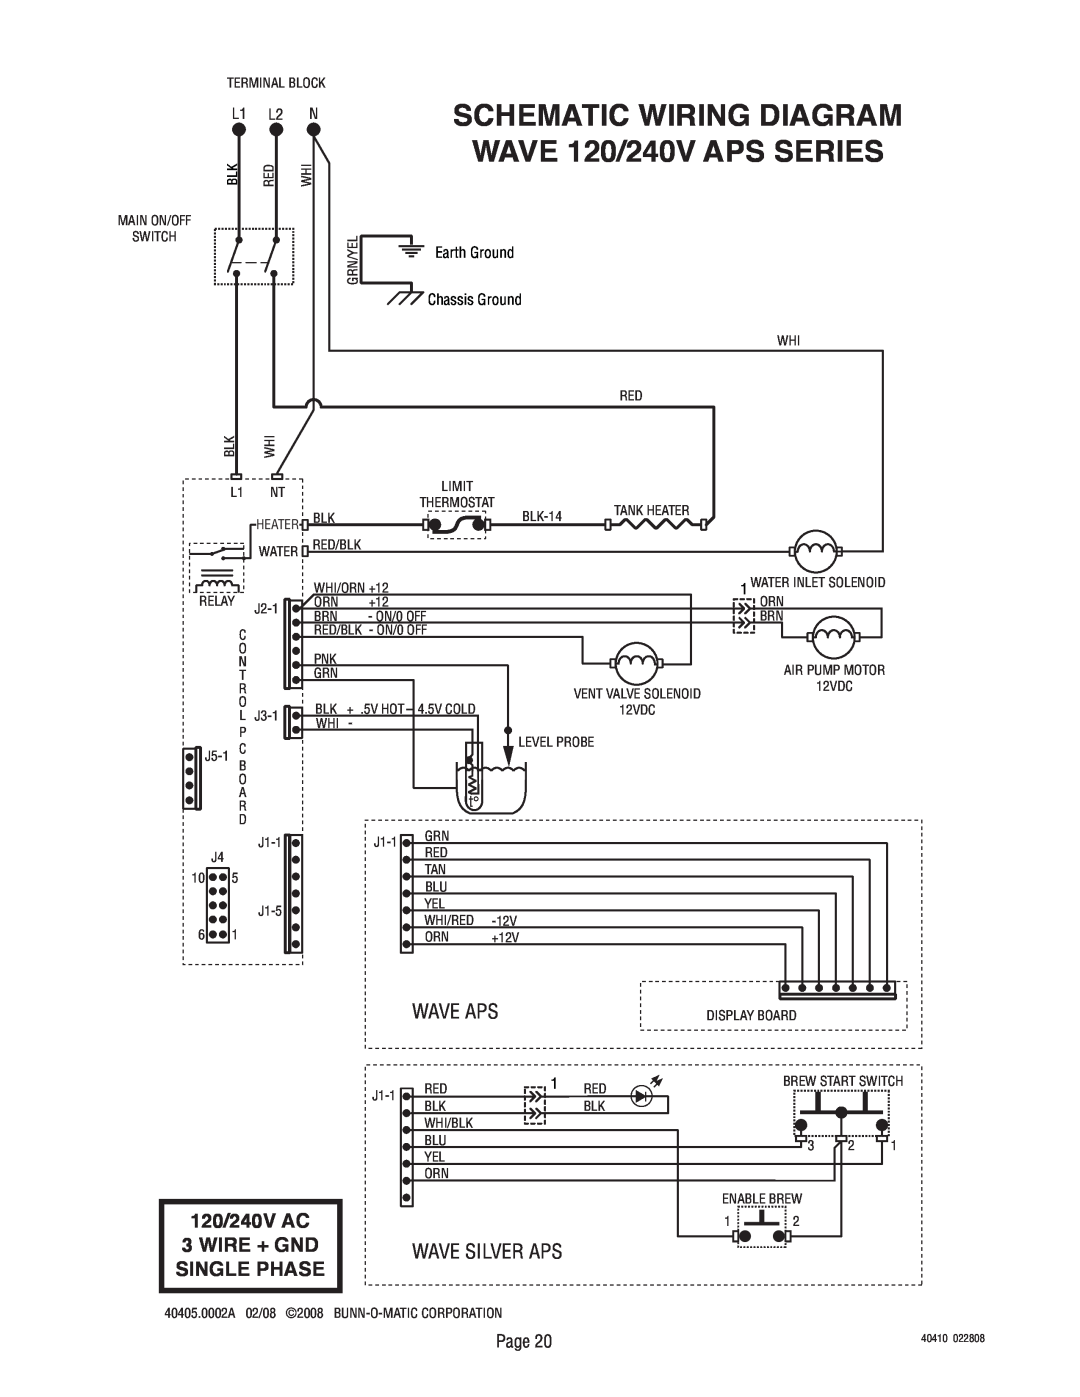 Bunn Smart Wave Series SCHEMATIC WIRING DIAGRAM WAVE 120/240V APS SERIES, 120/240V AC 3 WIRE + GND SINGLE PHASE, Page 